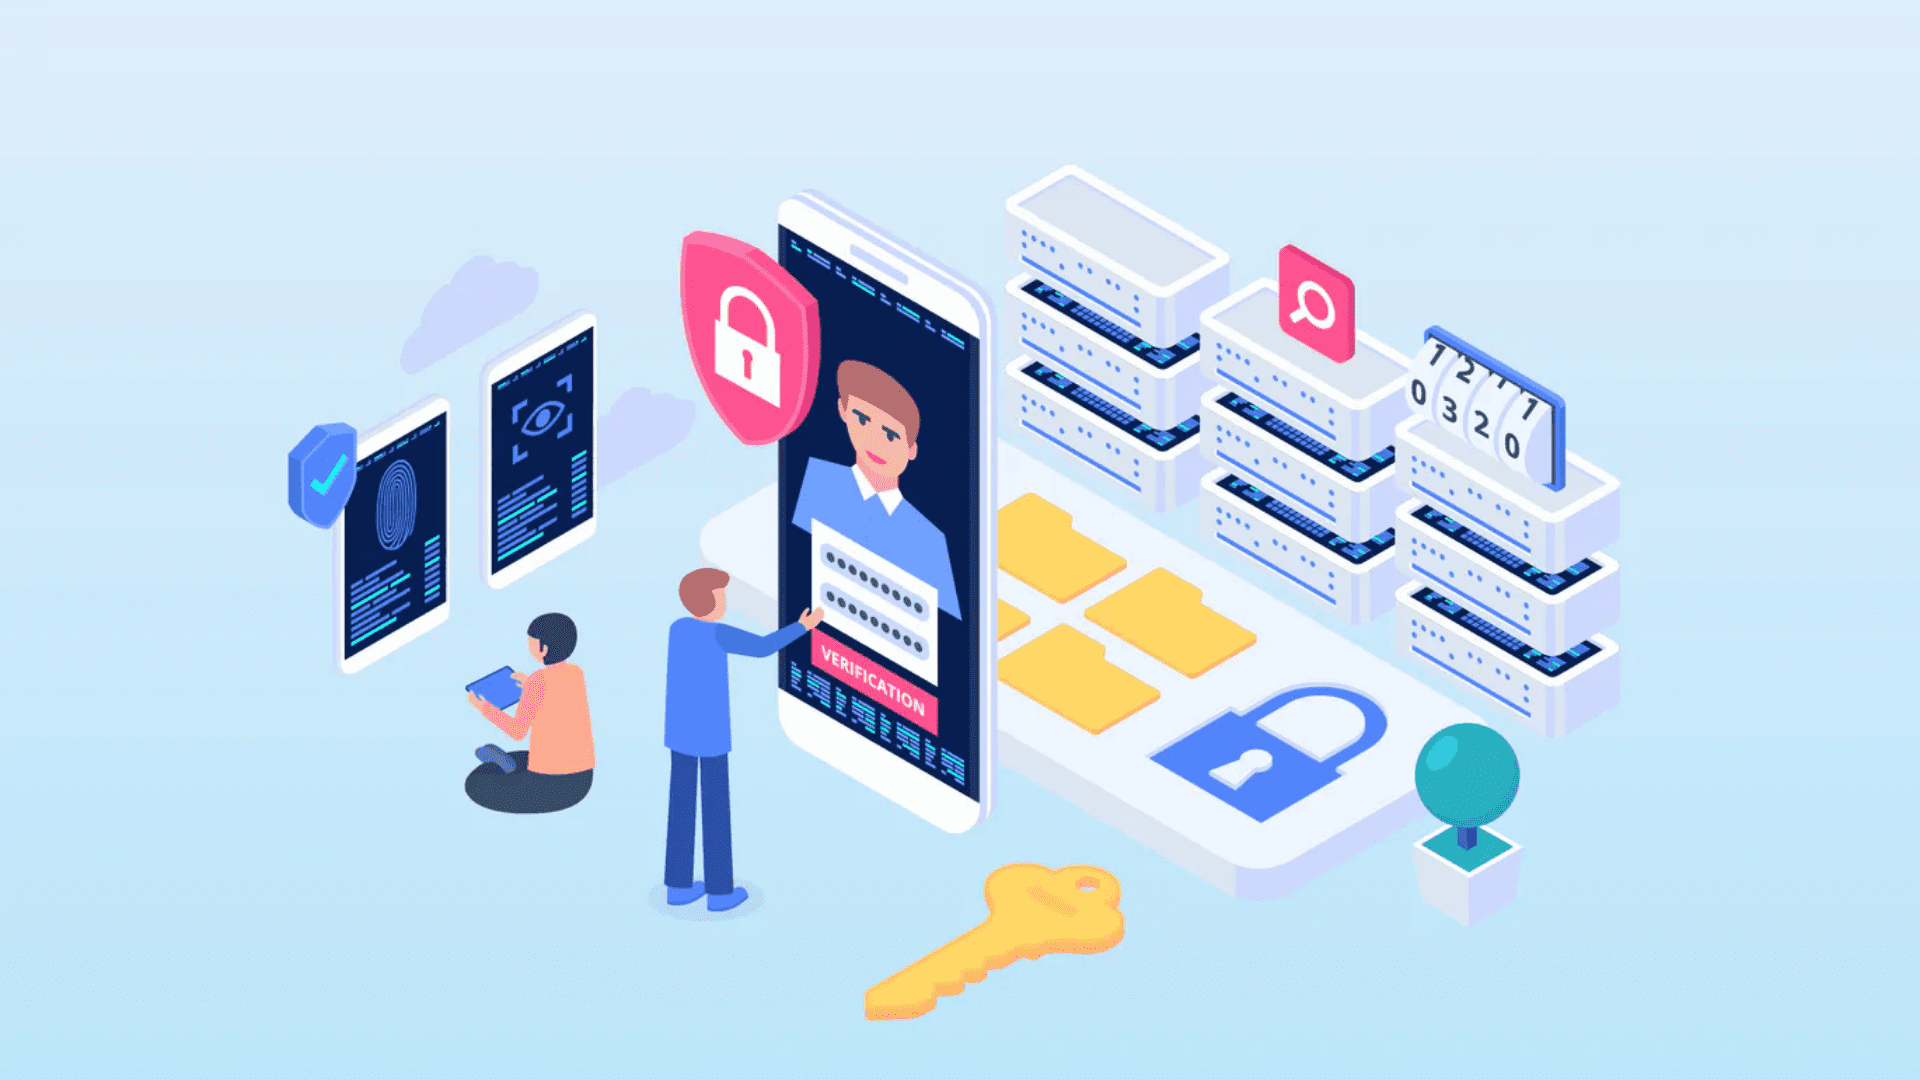 Challenges of meeting app privacy guidelines